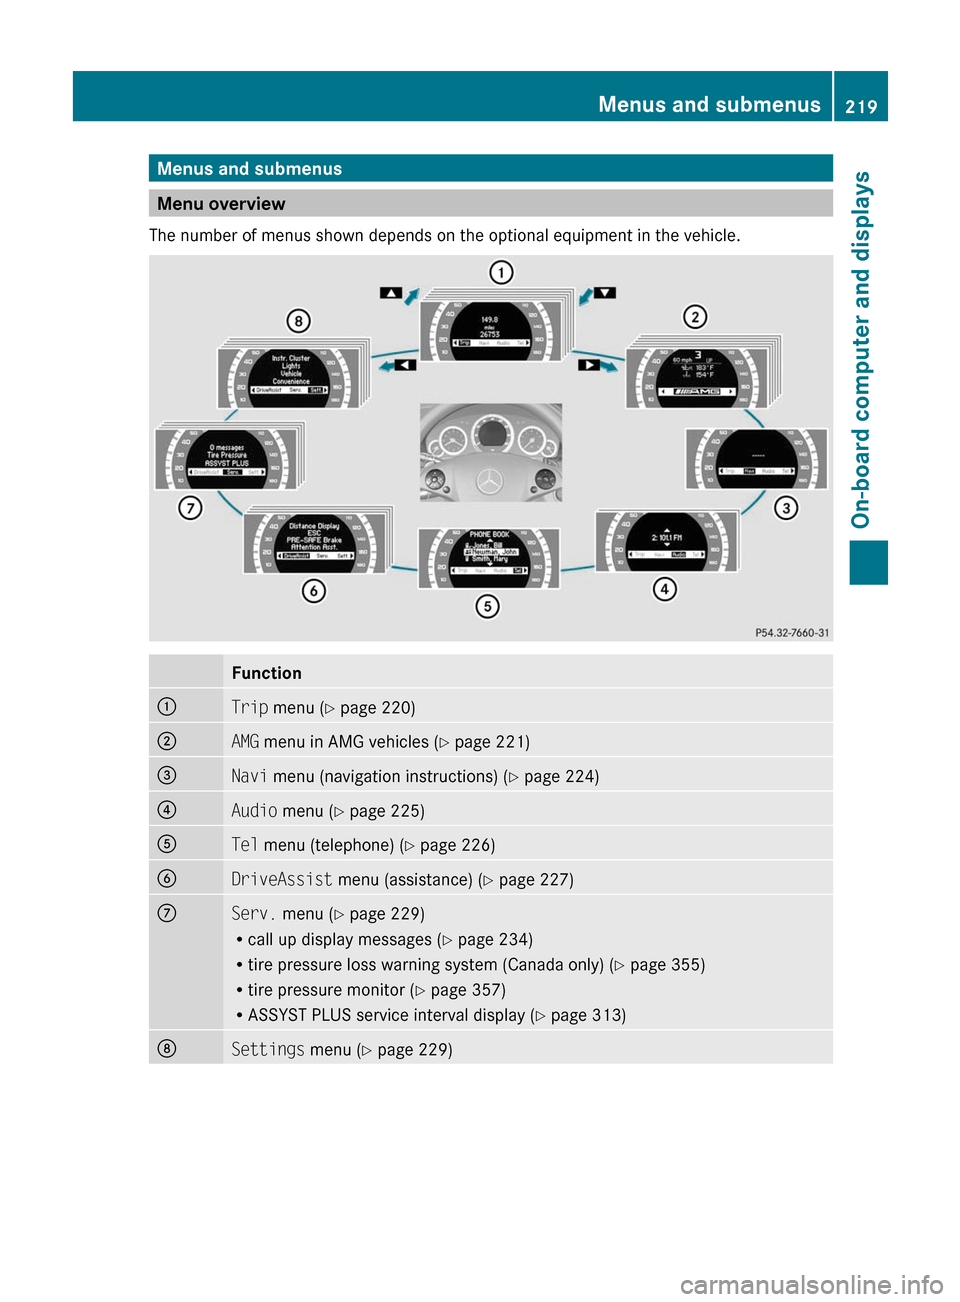 MERCEDES-BENZ E550 4MATIC 2011 W212 Owners Manual Menus and submenus
Menu overview
The number of menus shown depends on the optional equipment in the vehicle. 
Function:Trip  menu ( Y page 220);AMG  menu in AMG vehicles ( Y page 221)=Navi  menu (navi